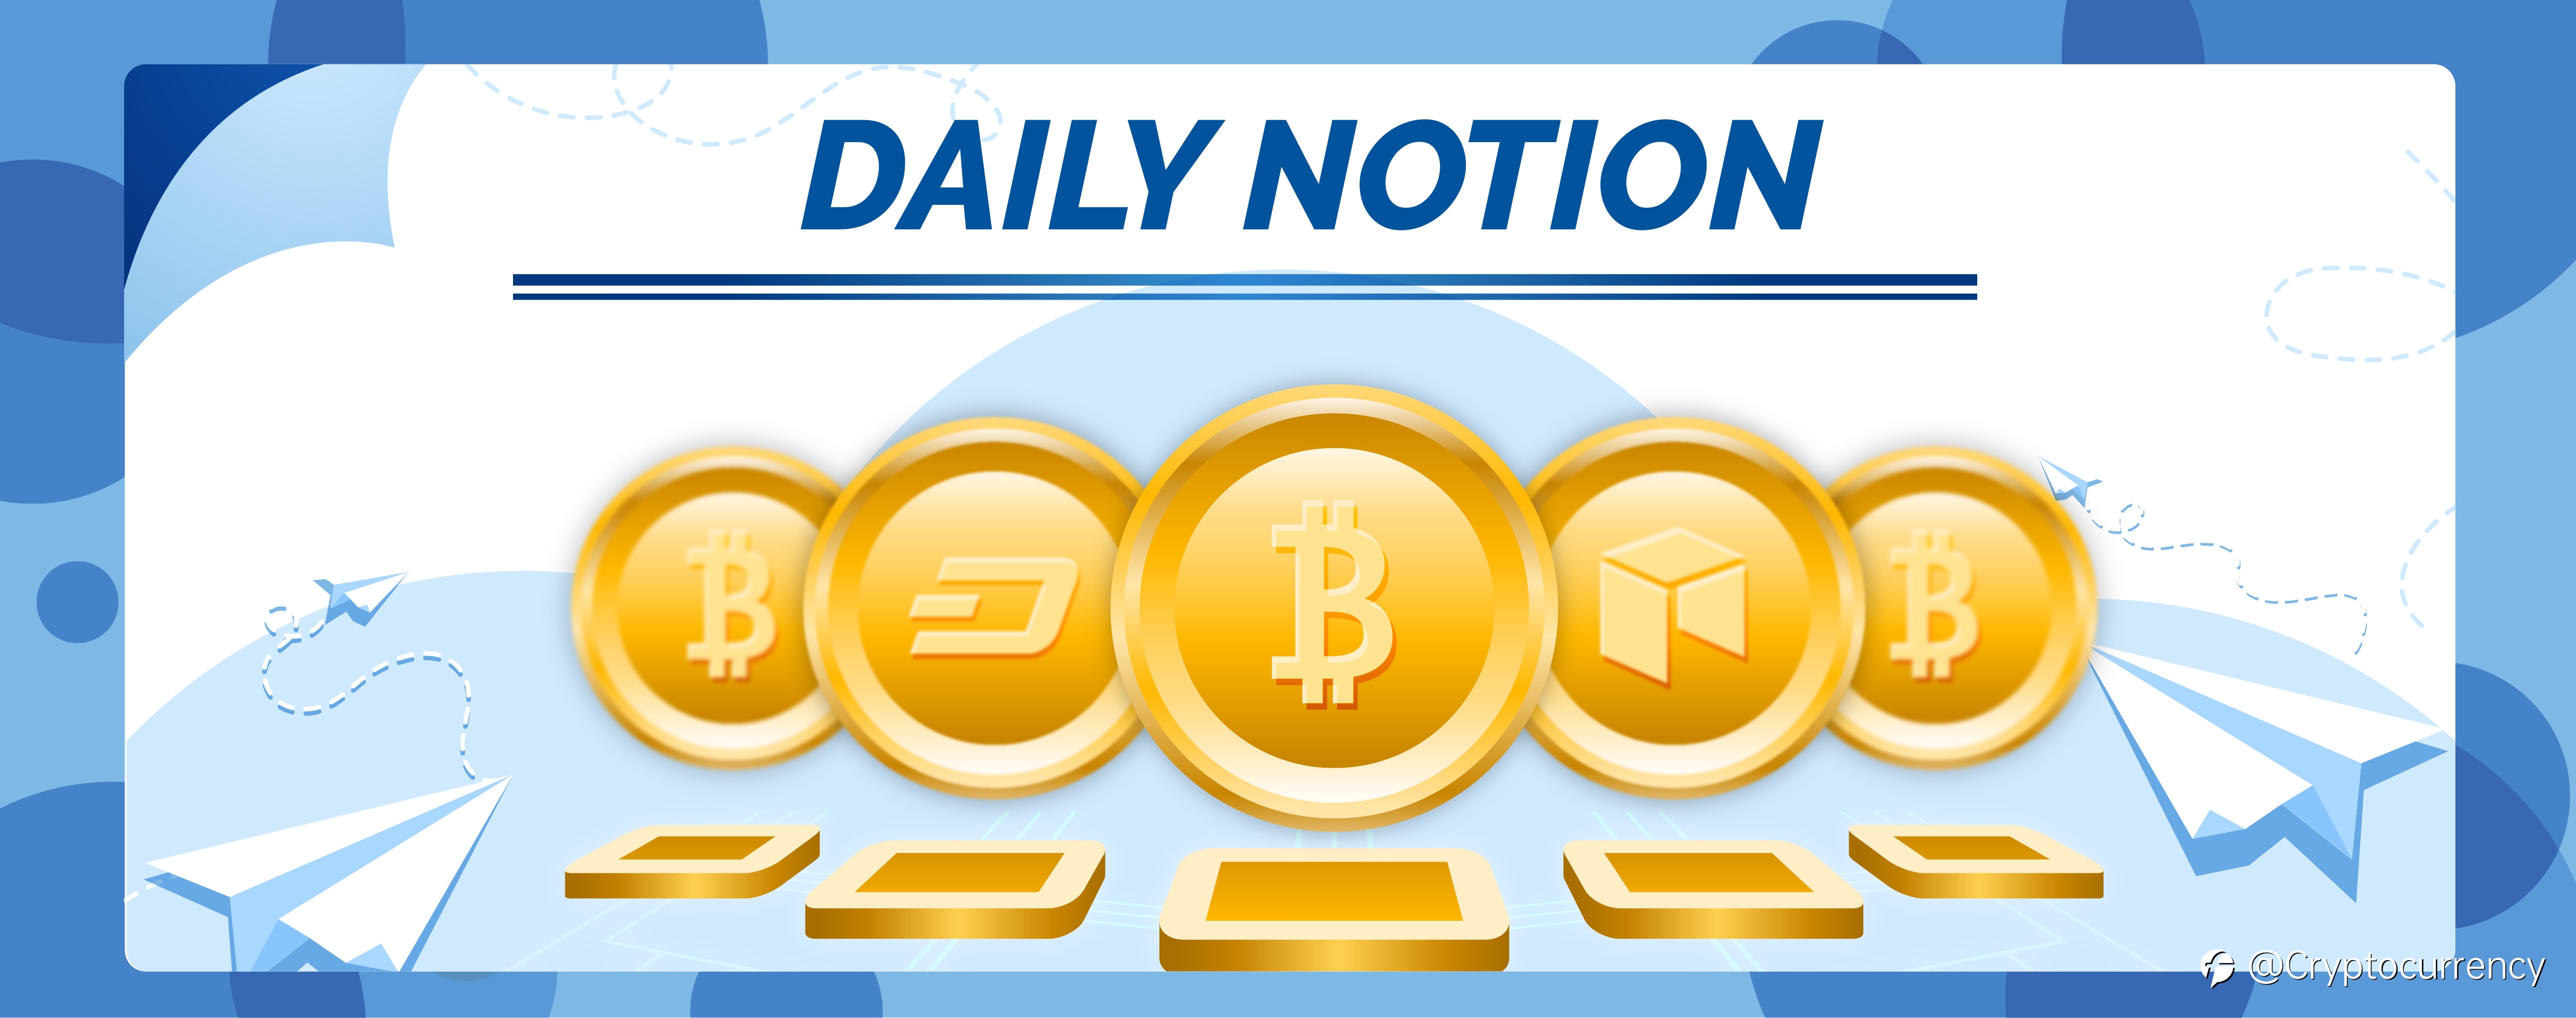 (DAILY NOTION): LTC/USD: Bulls Are Reaching Key Resistance